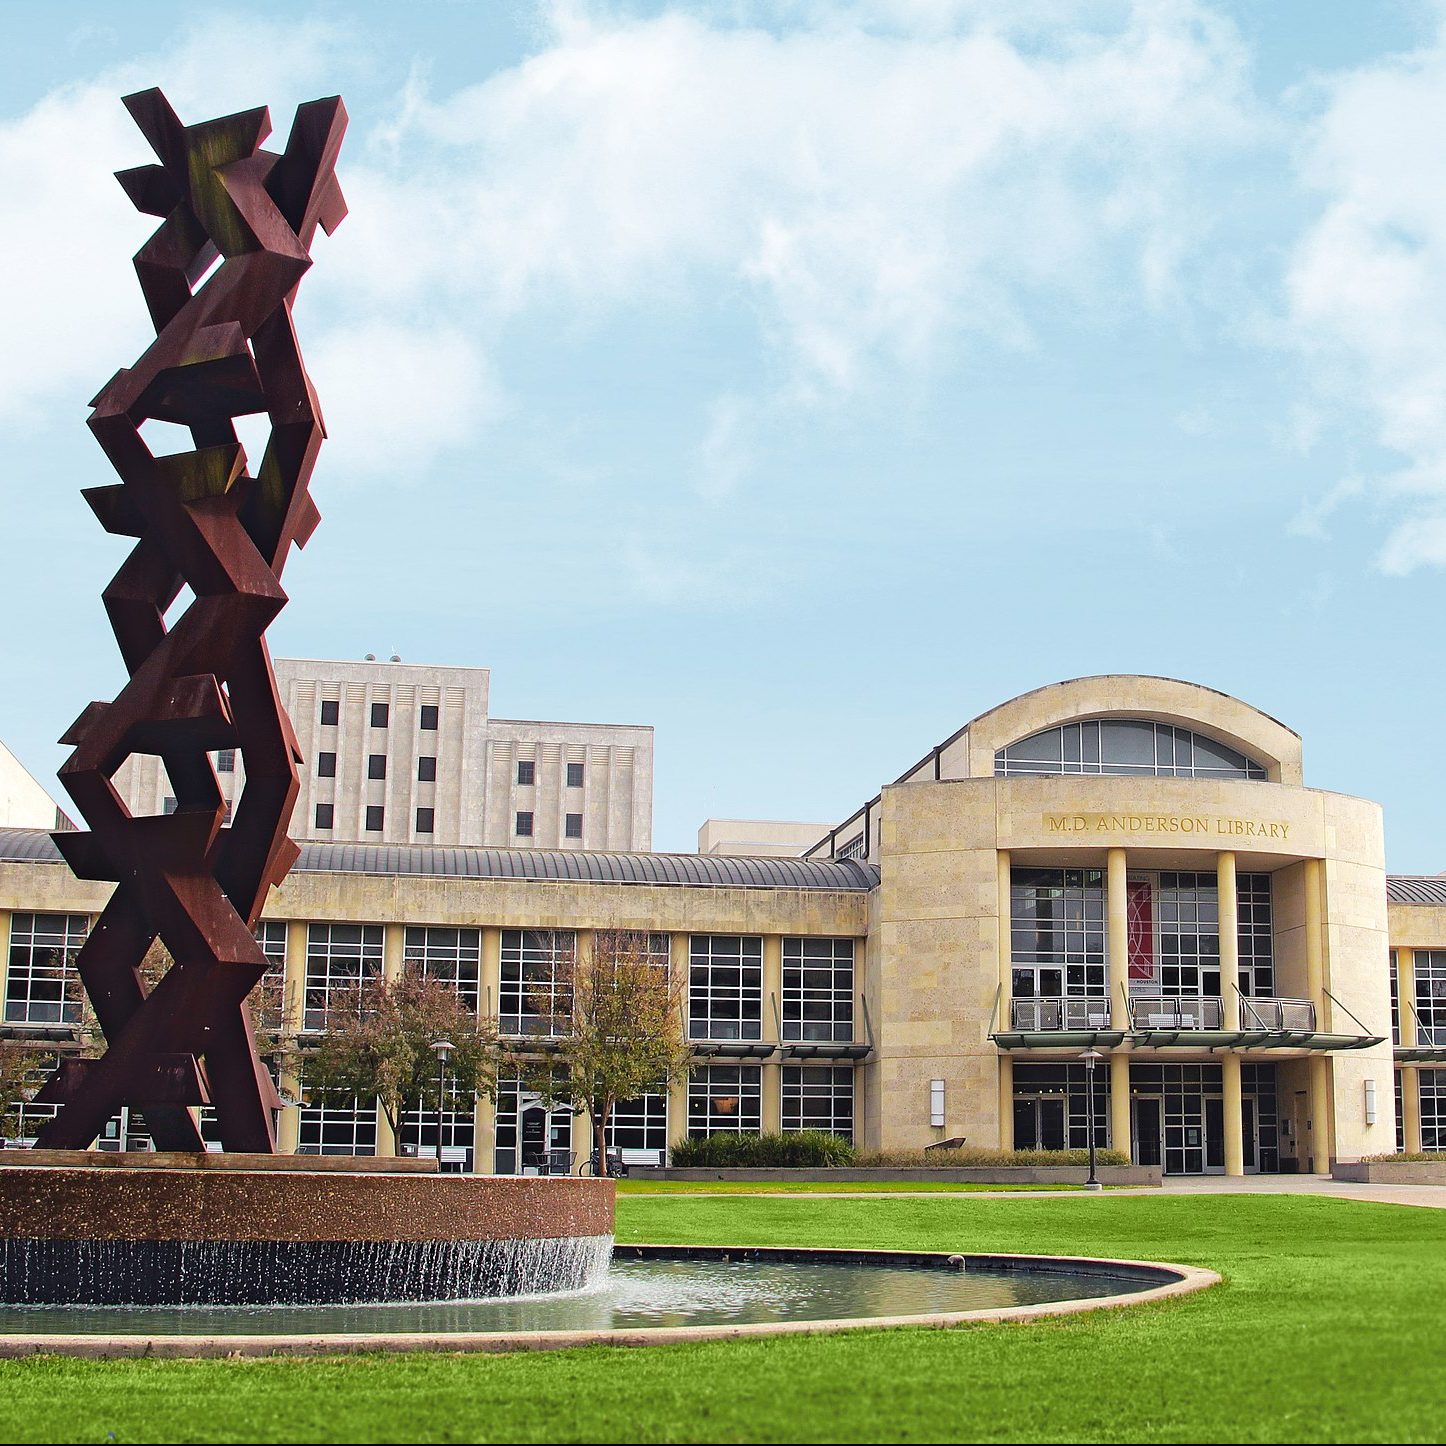 Photograph of University of Houston library and statue on lawn.